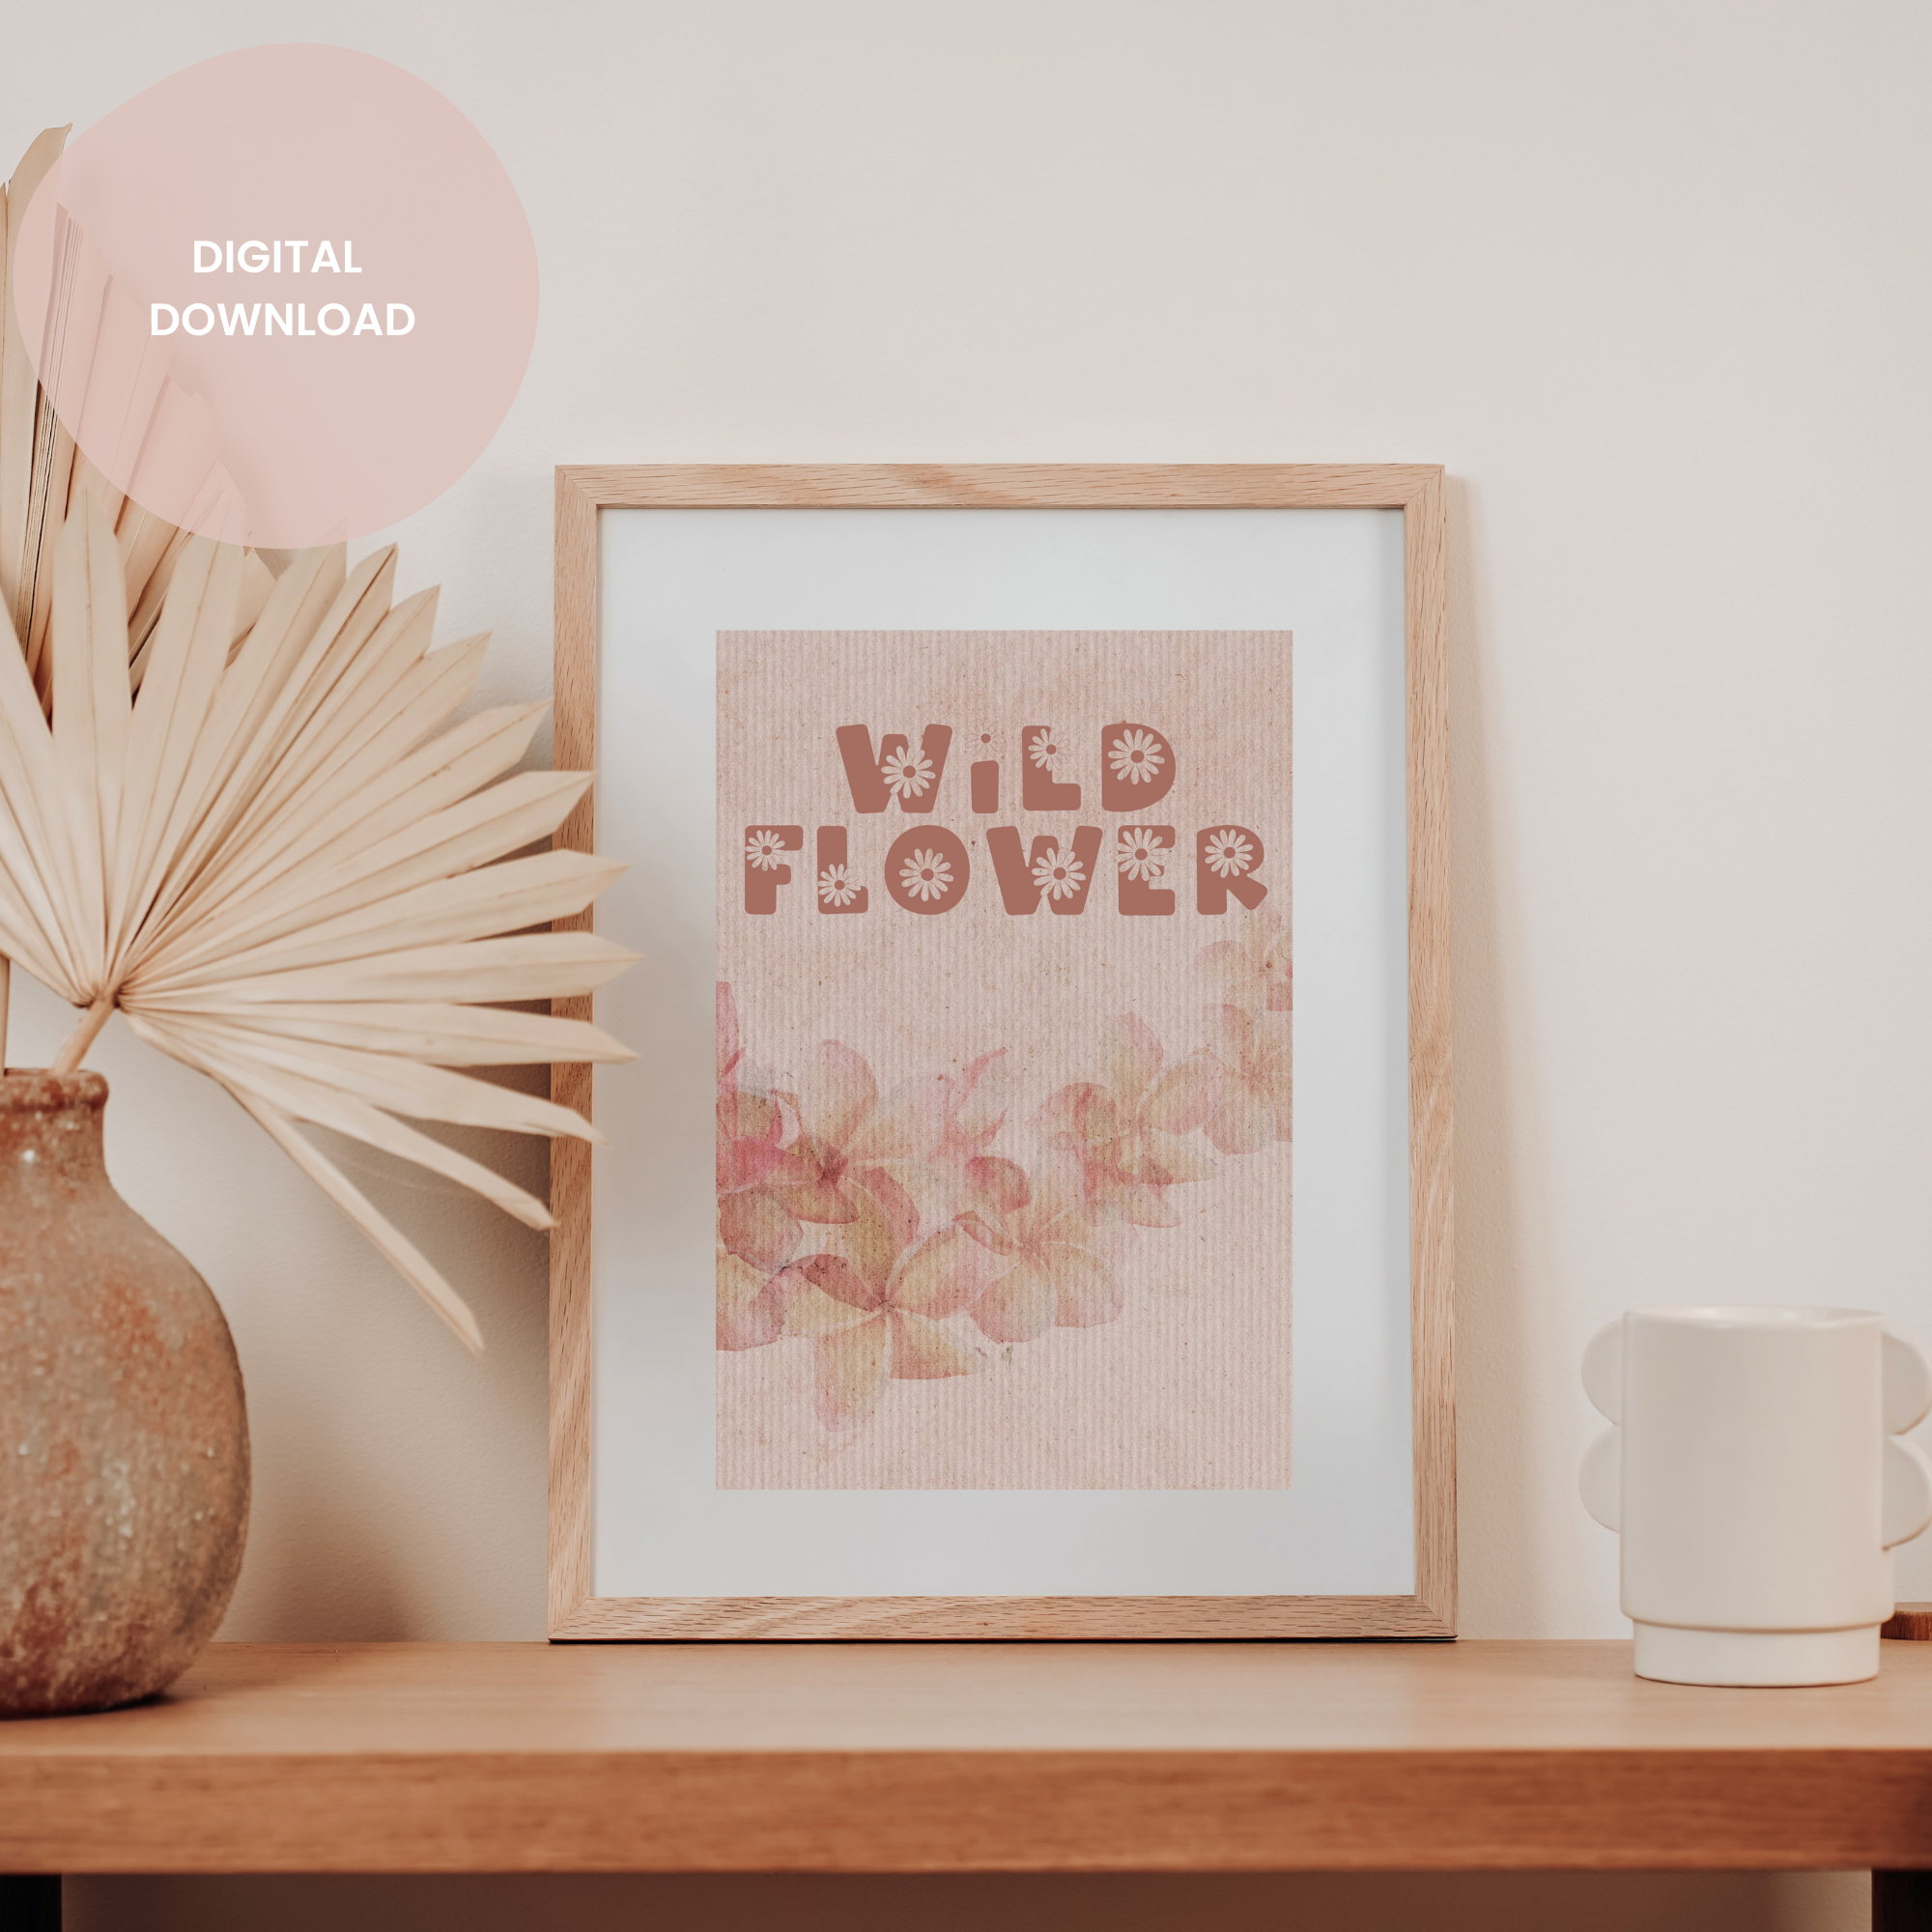 Wild Flower Wall Collage Poster - Whimsical Graphic for Artful Decor